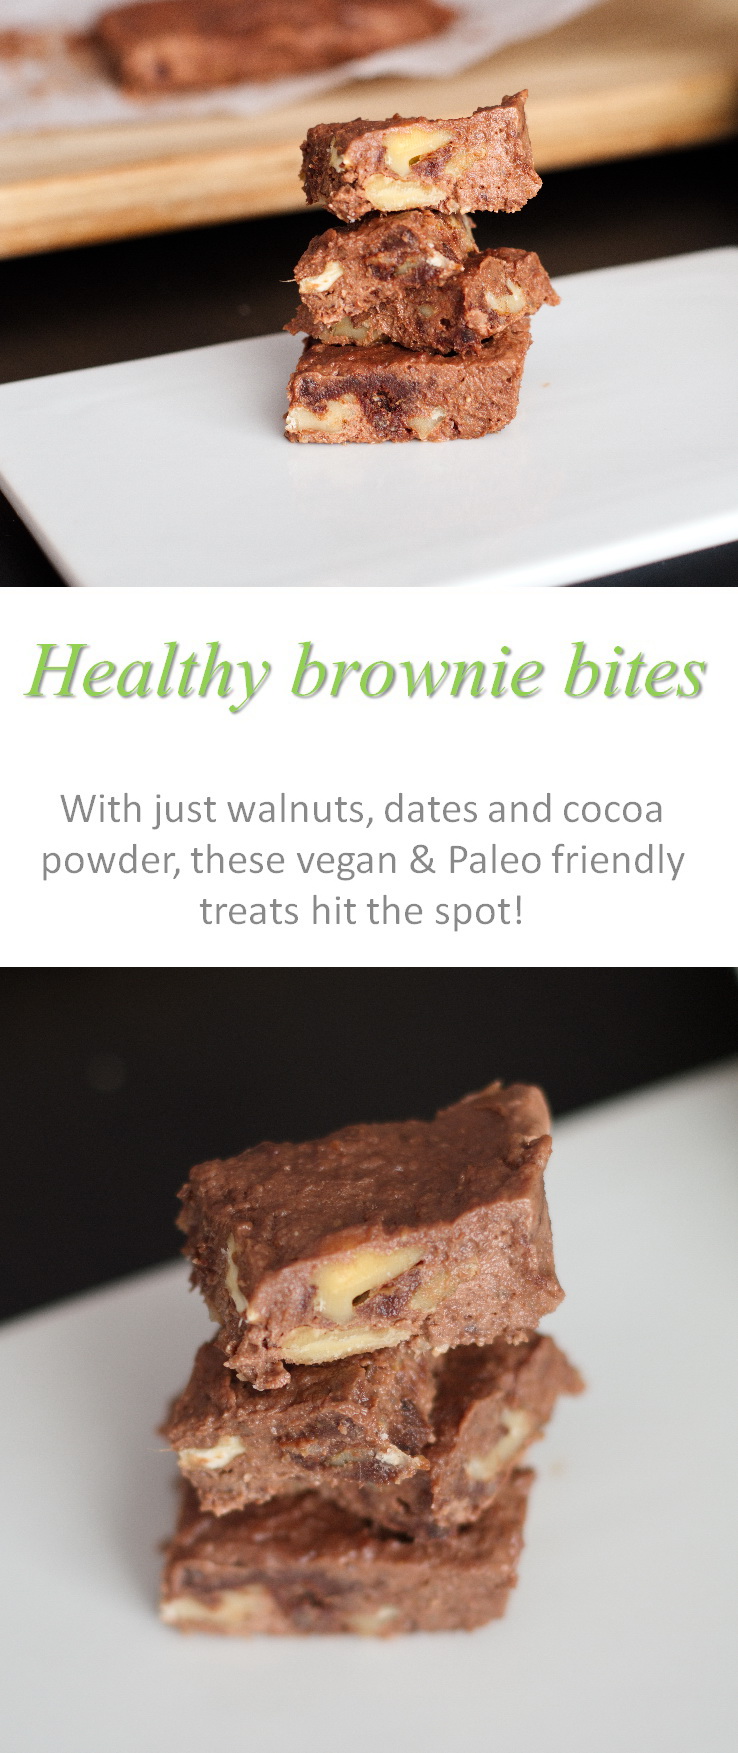 Cook at home | Healthy brownie bites - Cook at Home